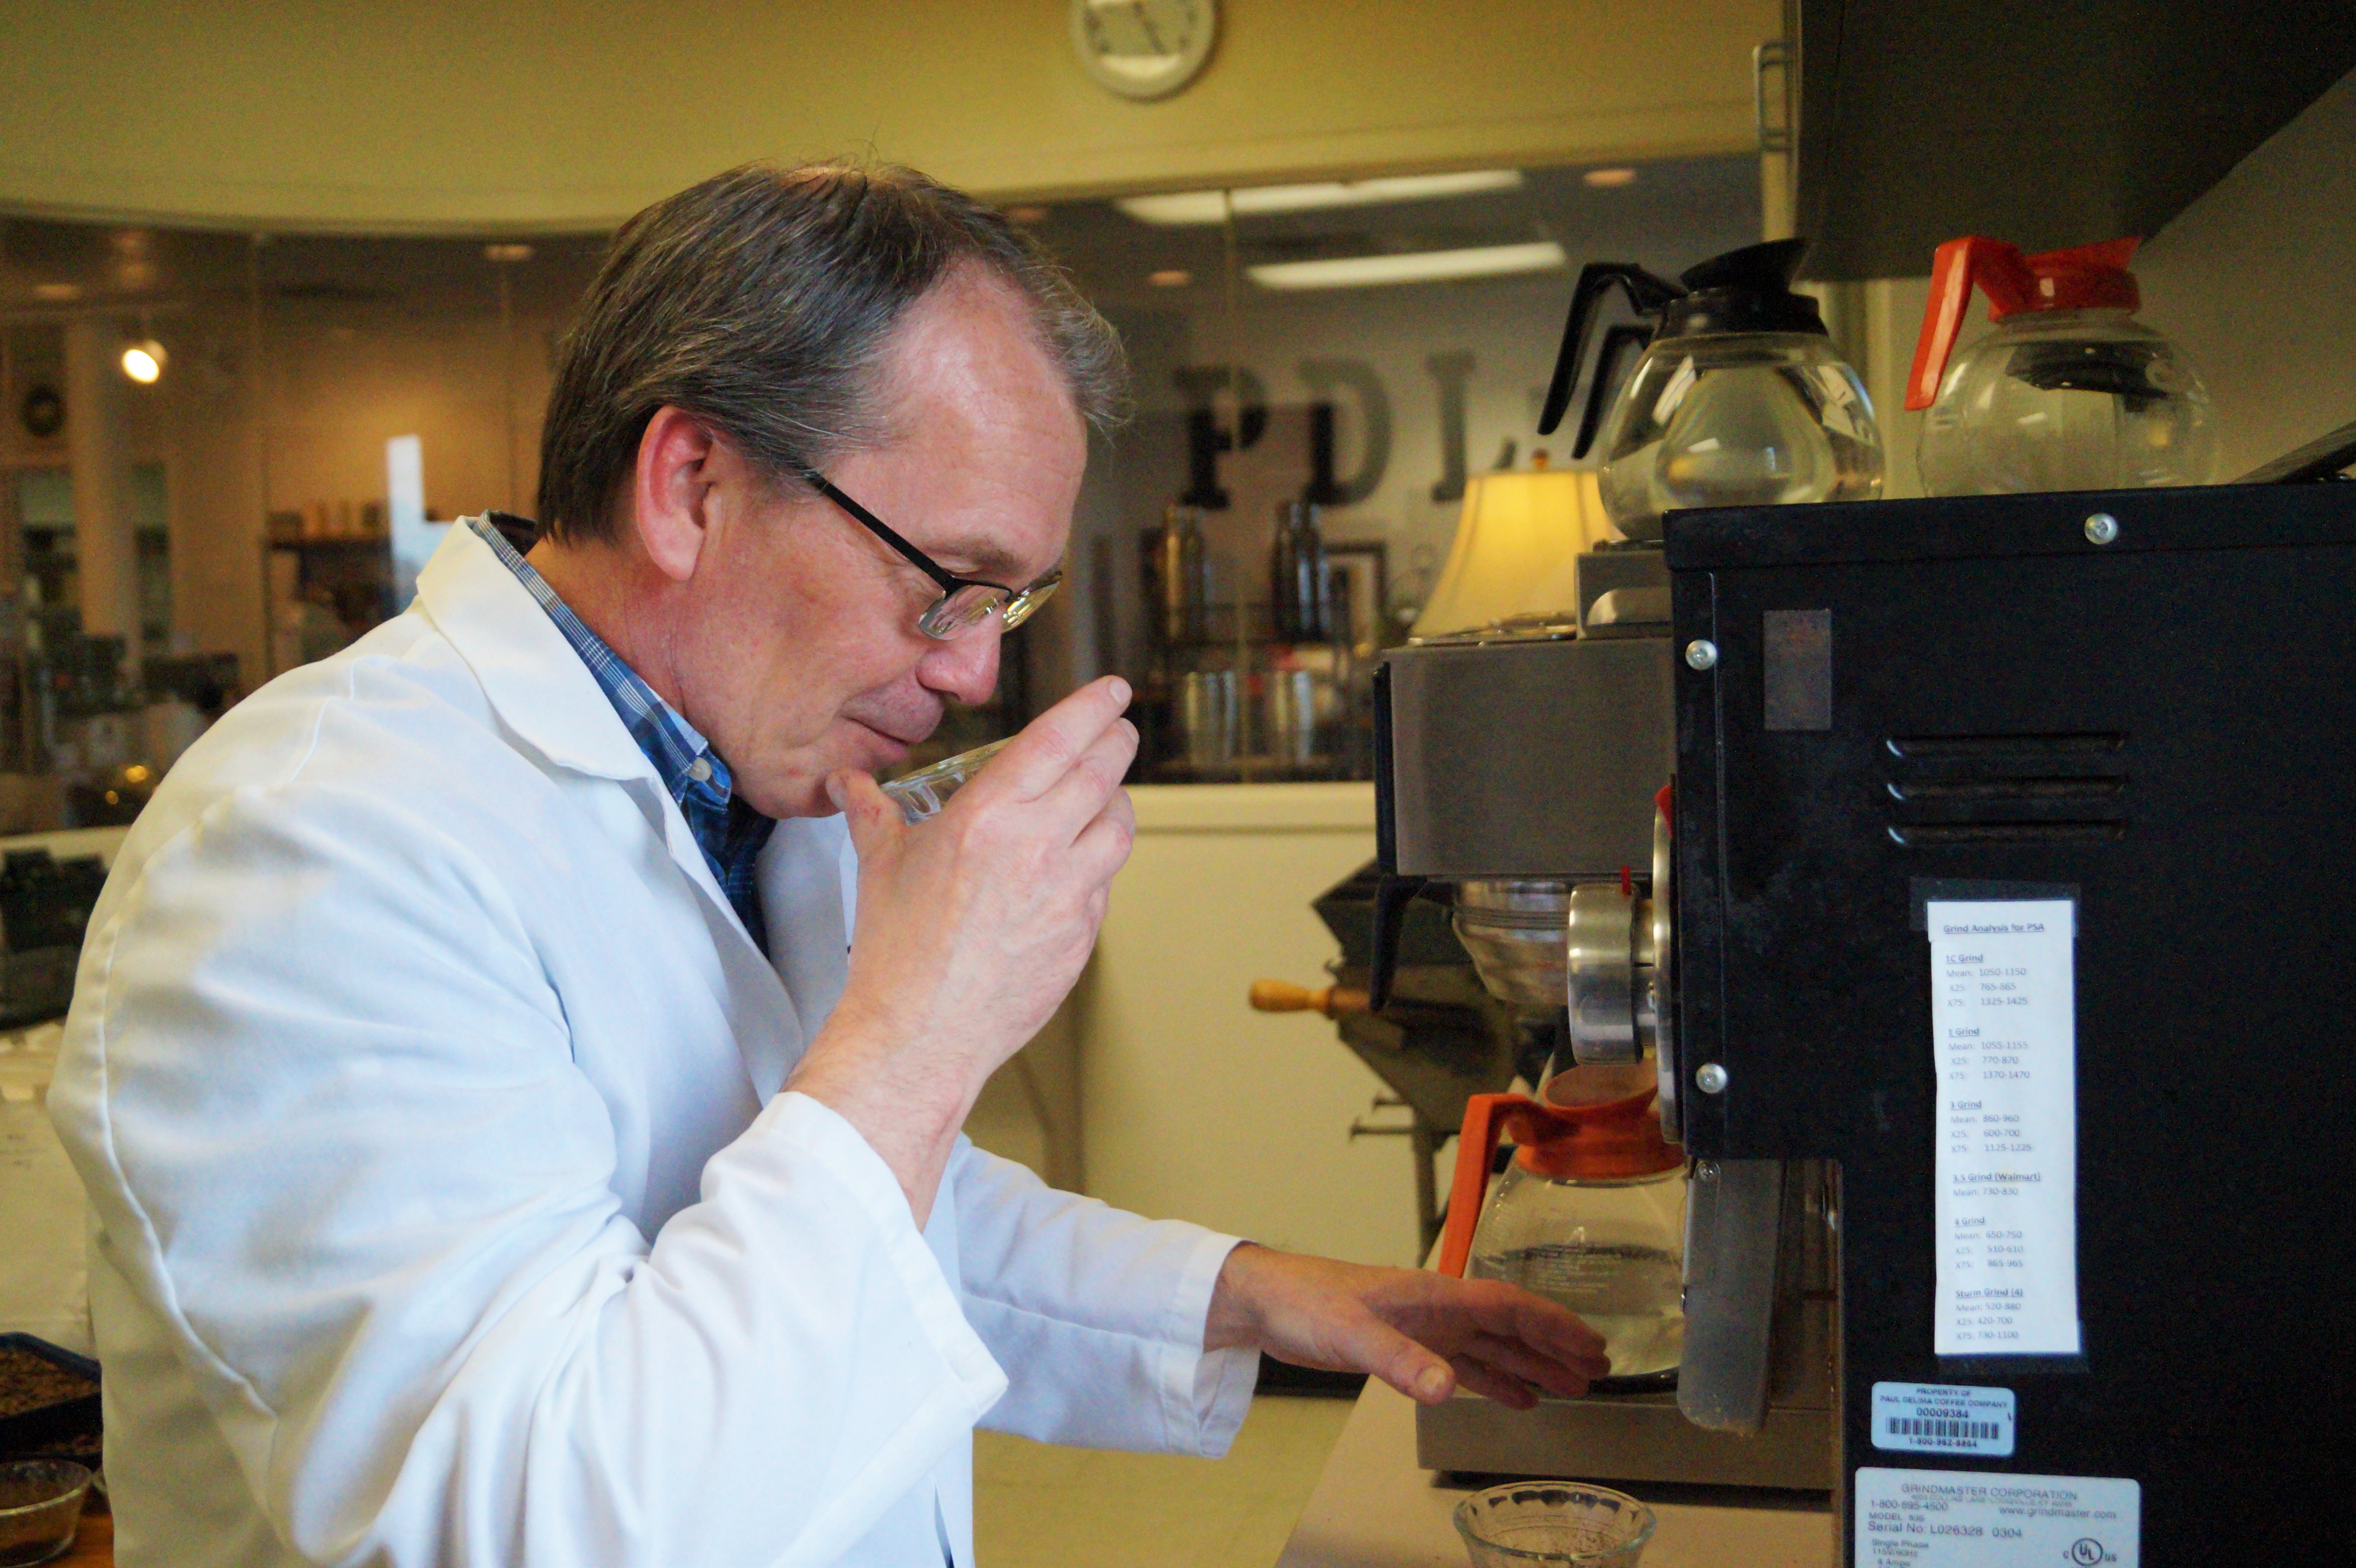 Glenn tests how the coffee beans smell in preparation for the cupping process.